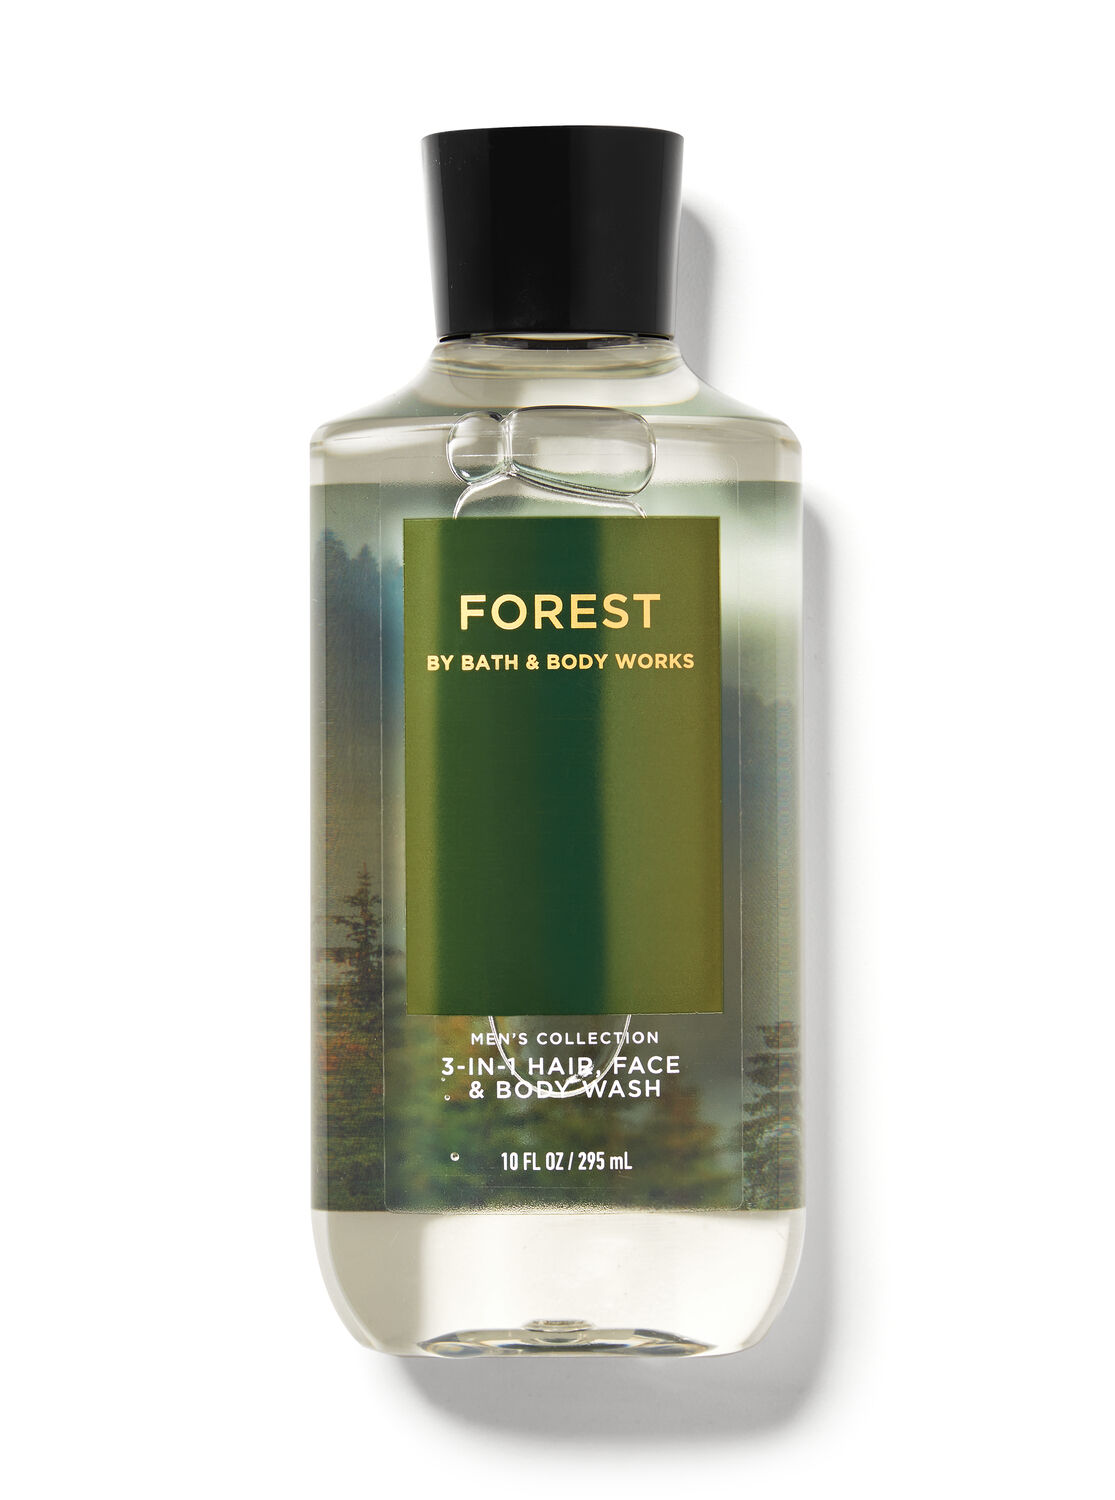 Forest 3-in-1 Hair, Face & Body Wash